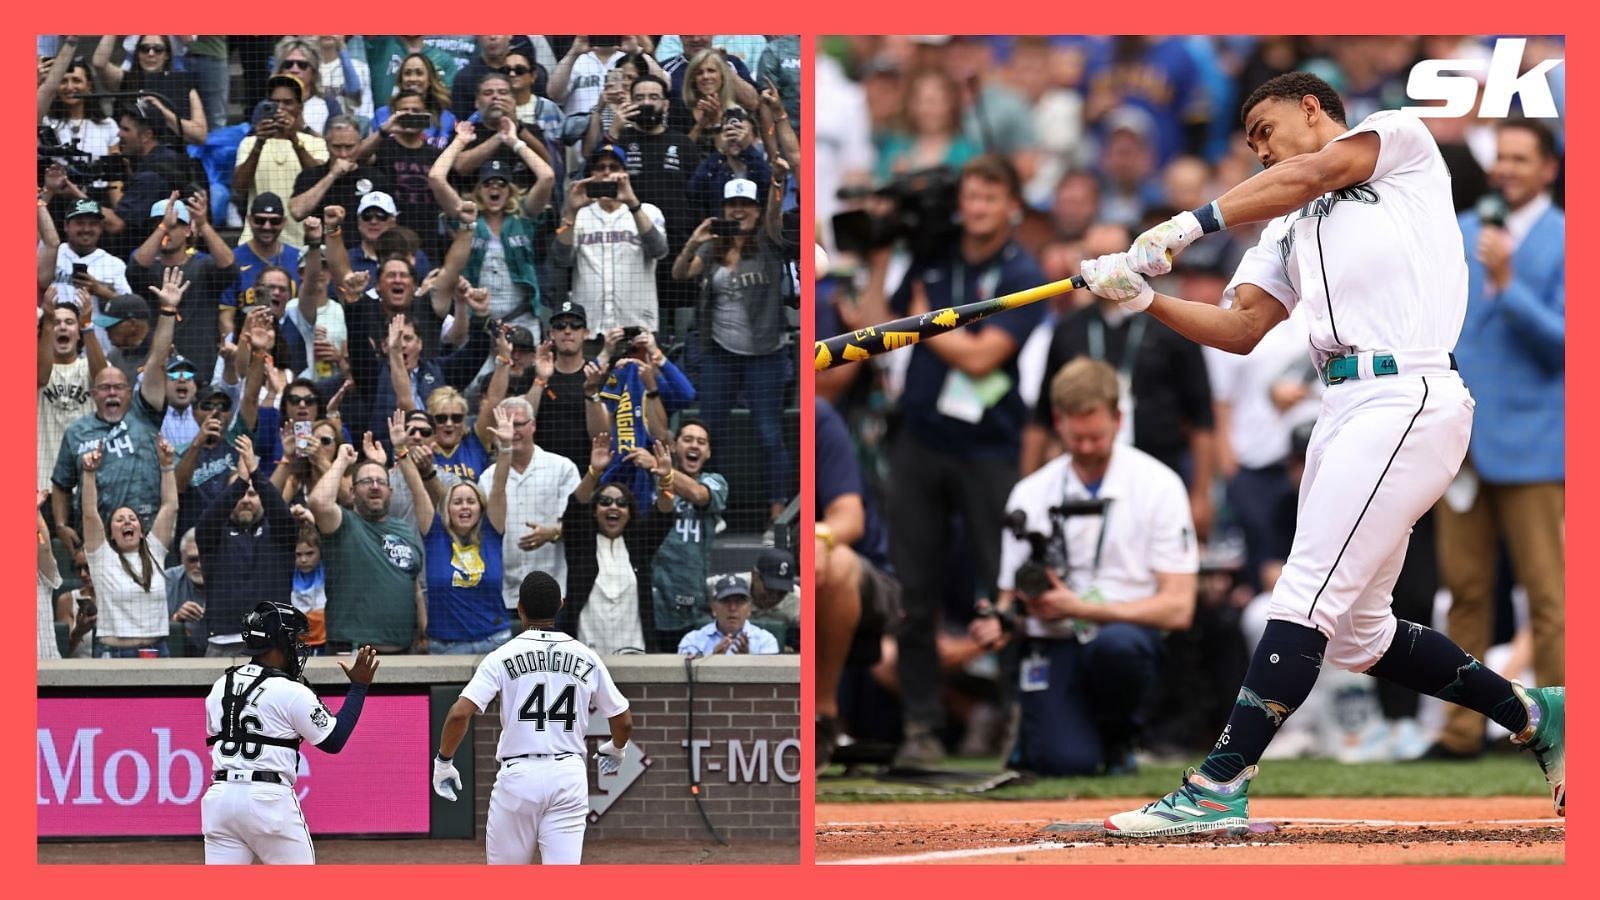 A love letter to Seattle fans: Julio Rodriguez sets Home Run Derby record  with 41 homers